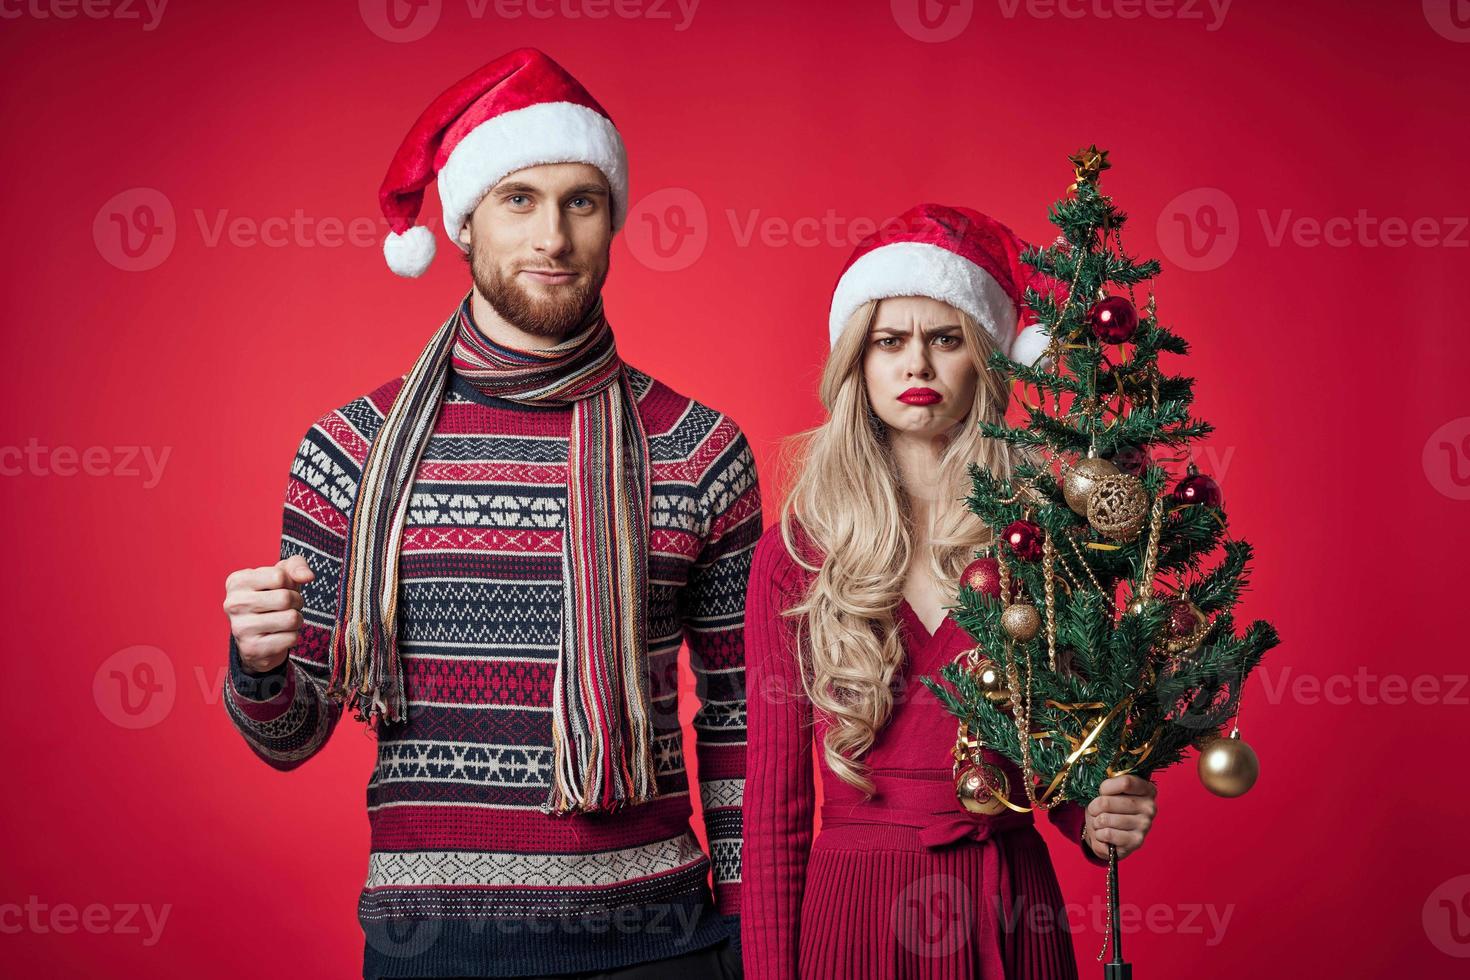 man and woman in New Year's clothes fun Christmas tree decoration portrait photo